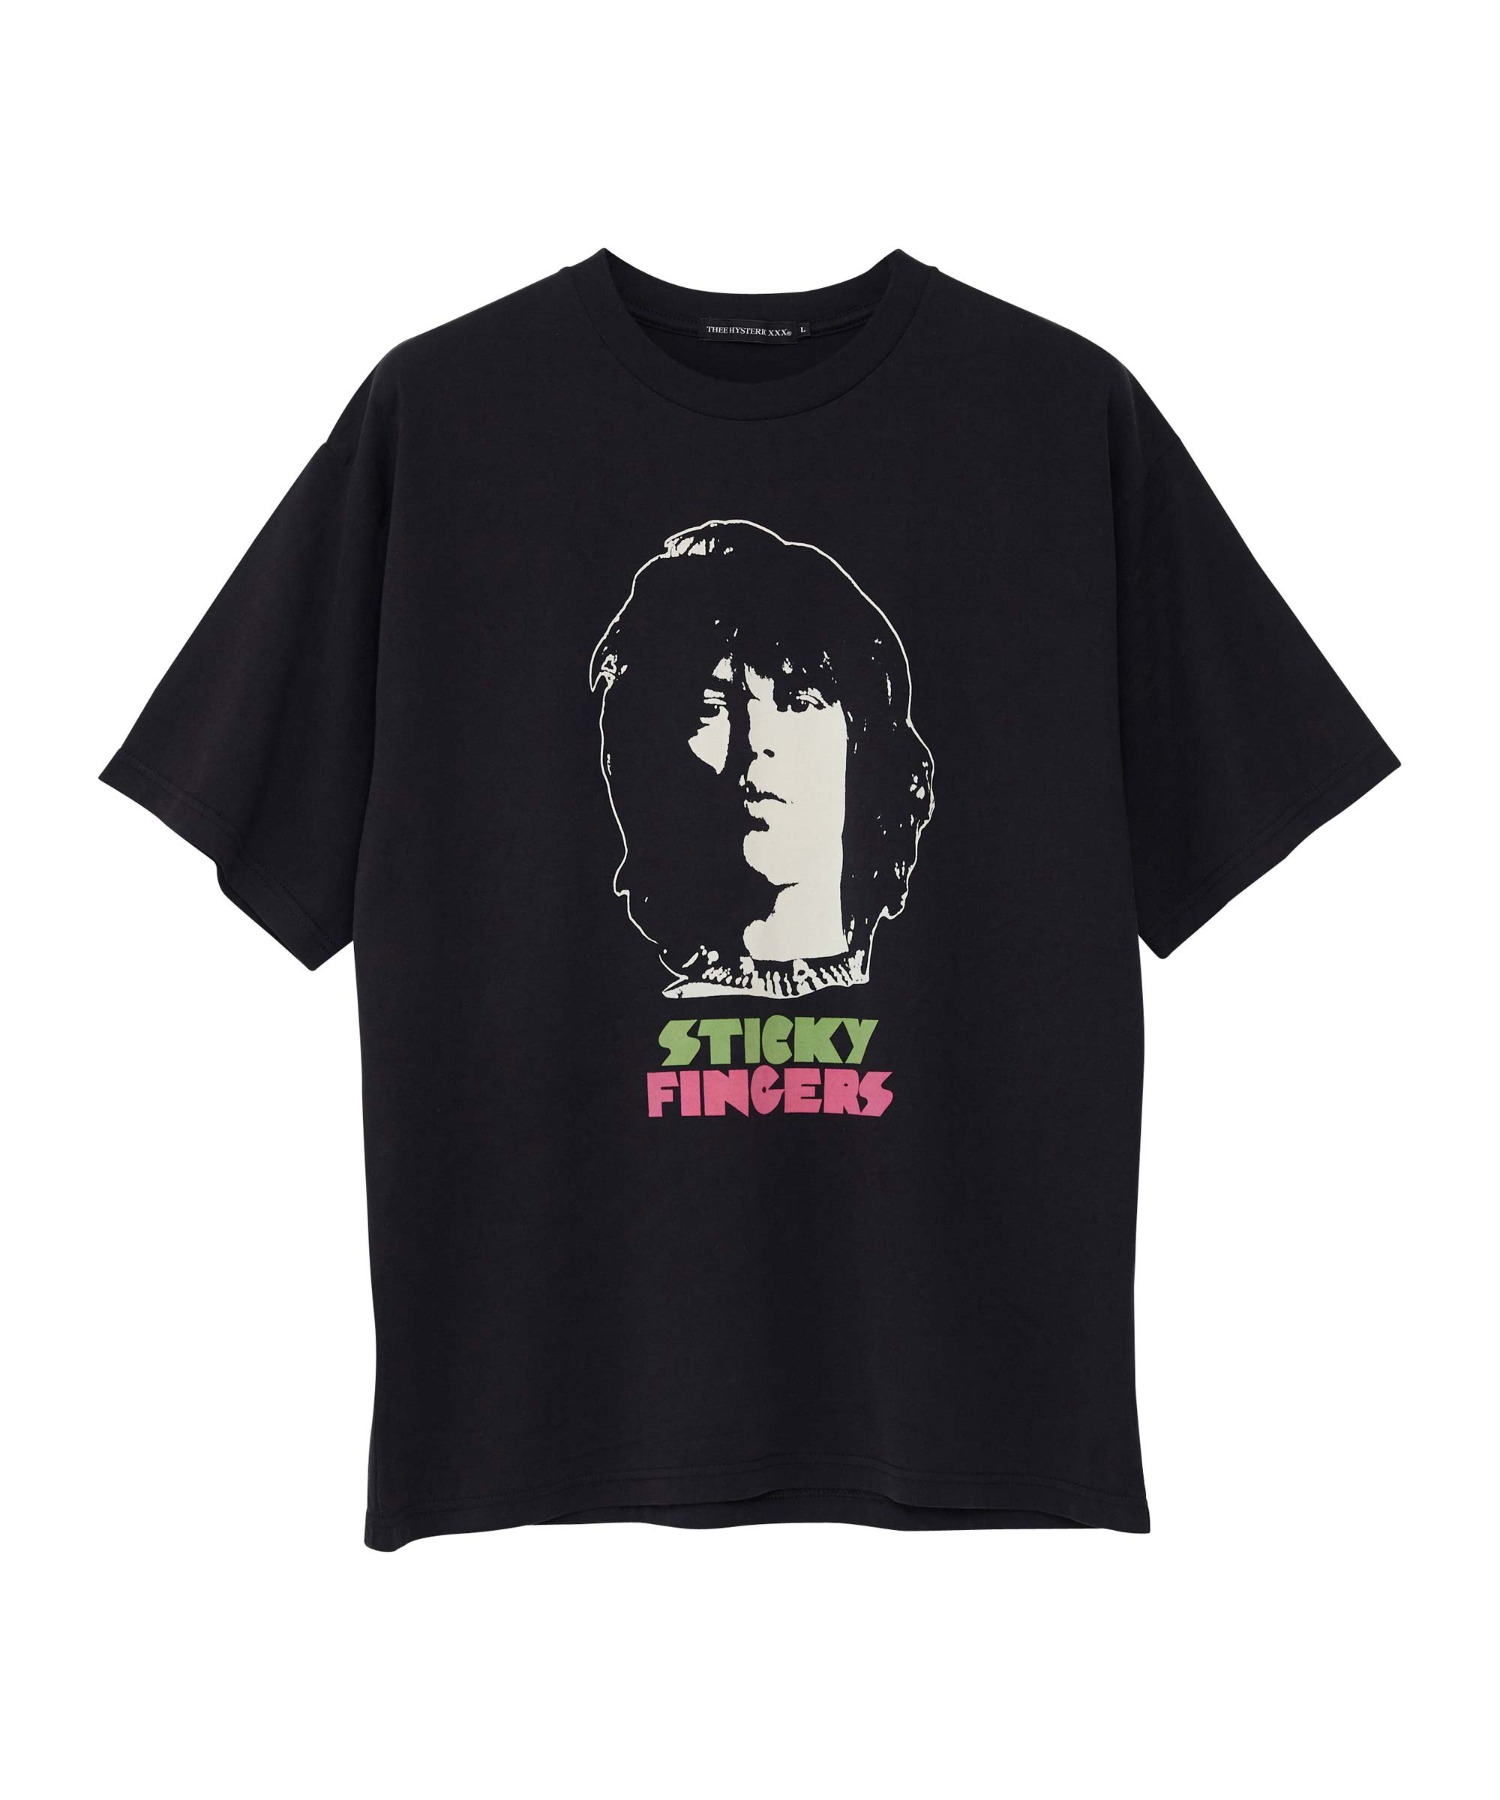 THE ROLLING STONES/MICK 1971 Tシャツ